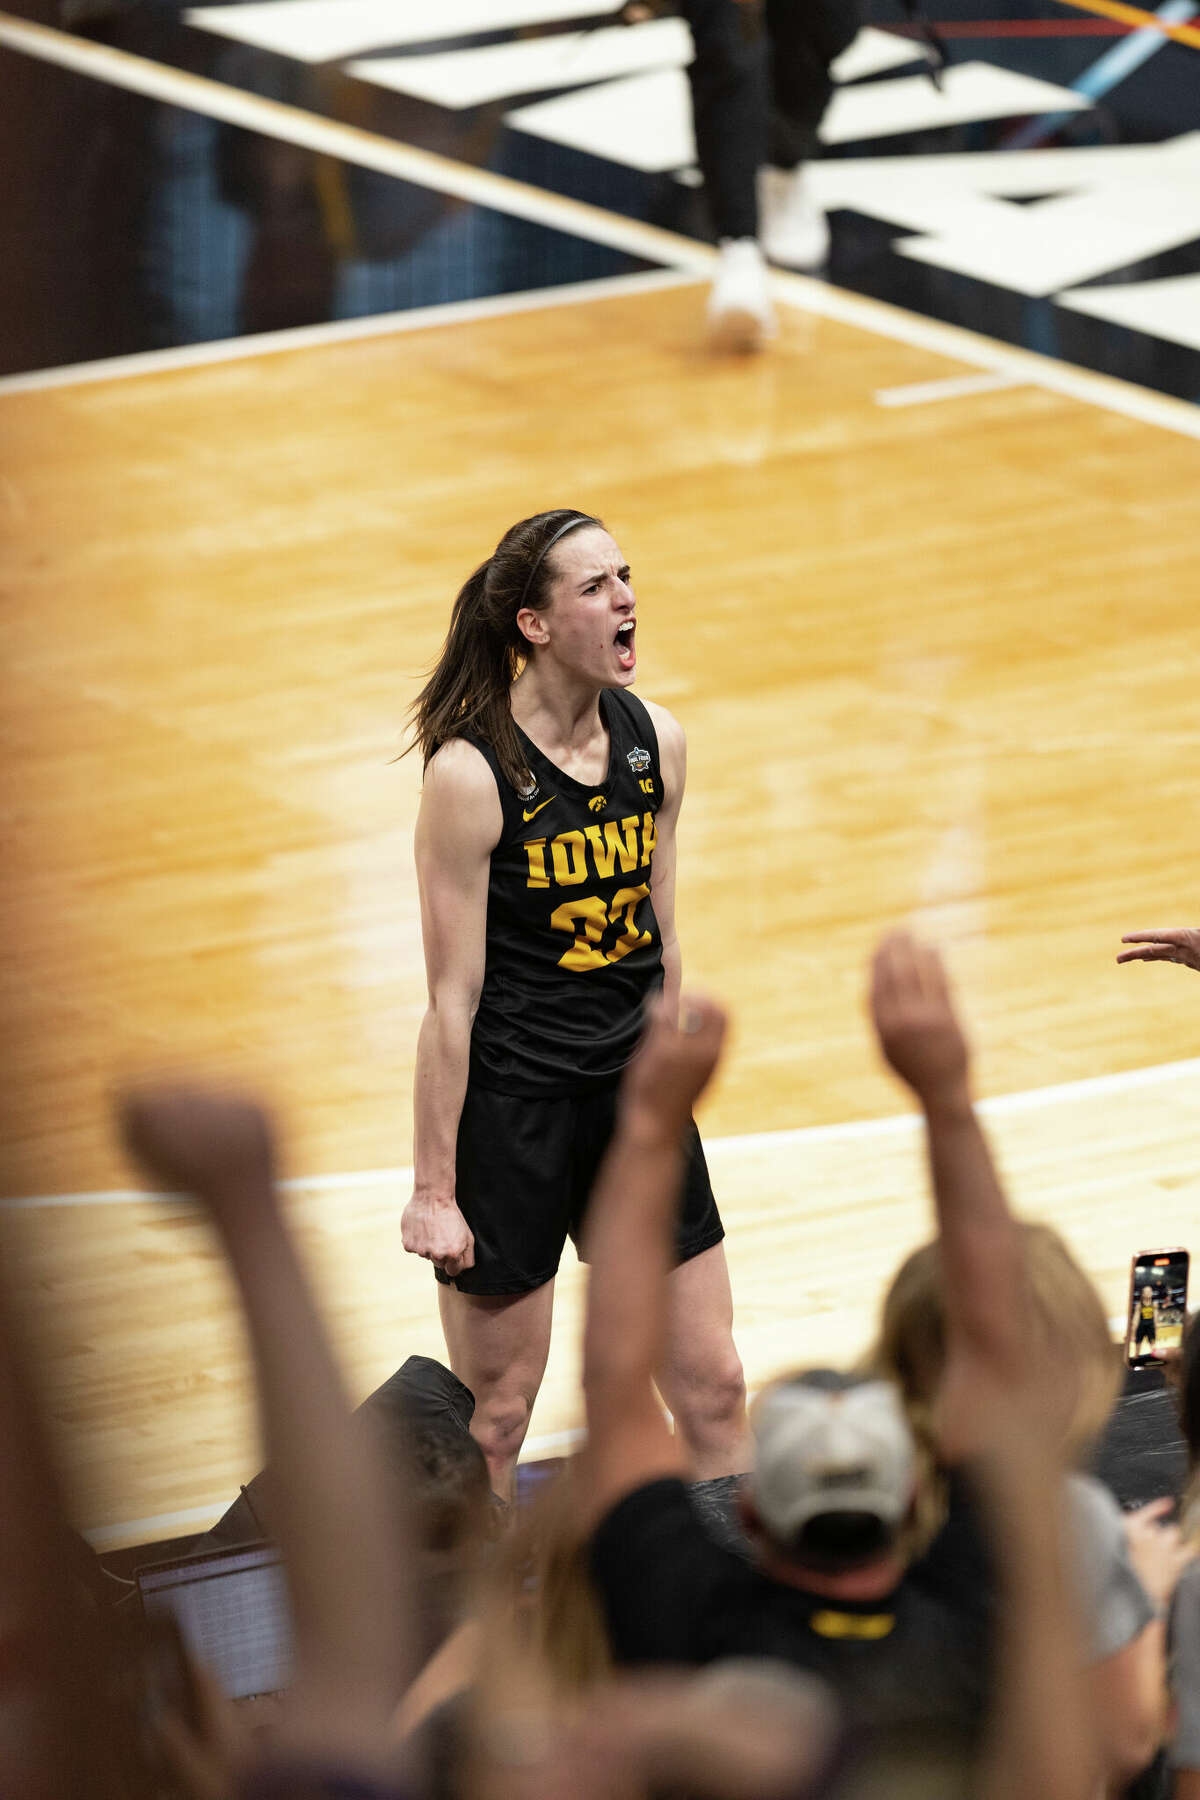 Caitlin Clark and the Iowa Hawkeyes will face the LSU Tigers in Sunday's National Championship game.